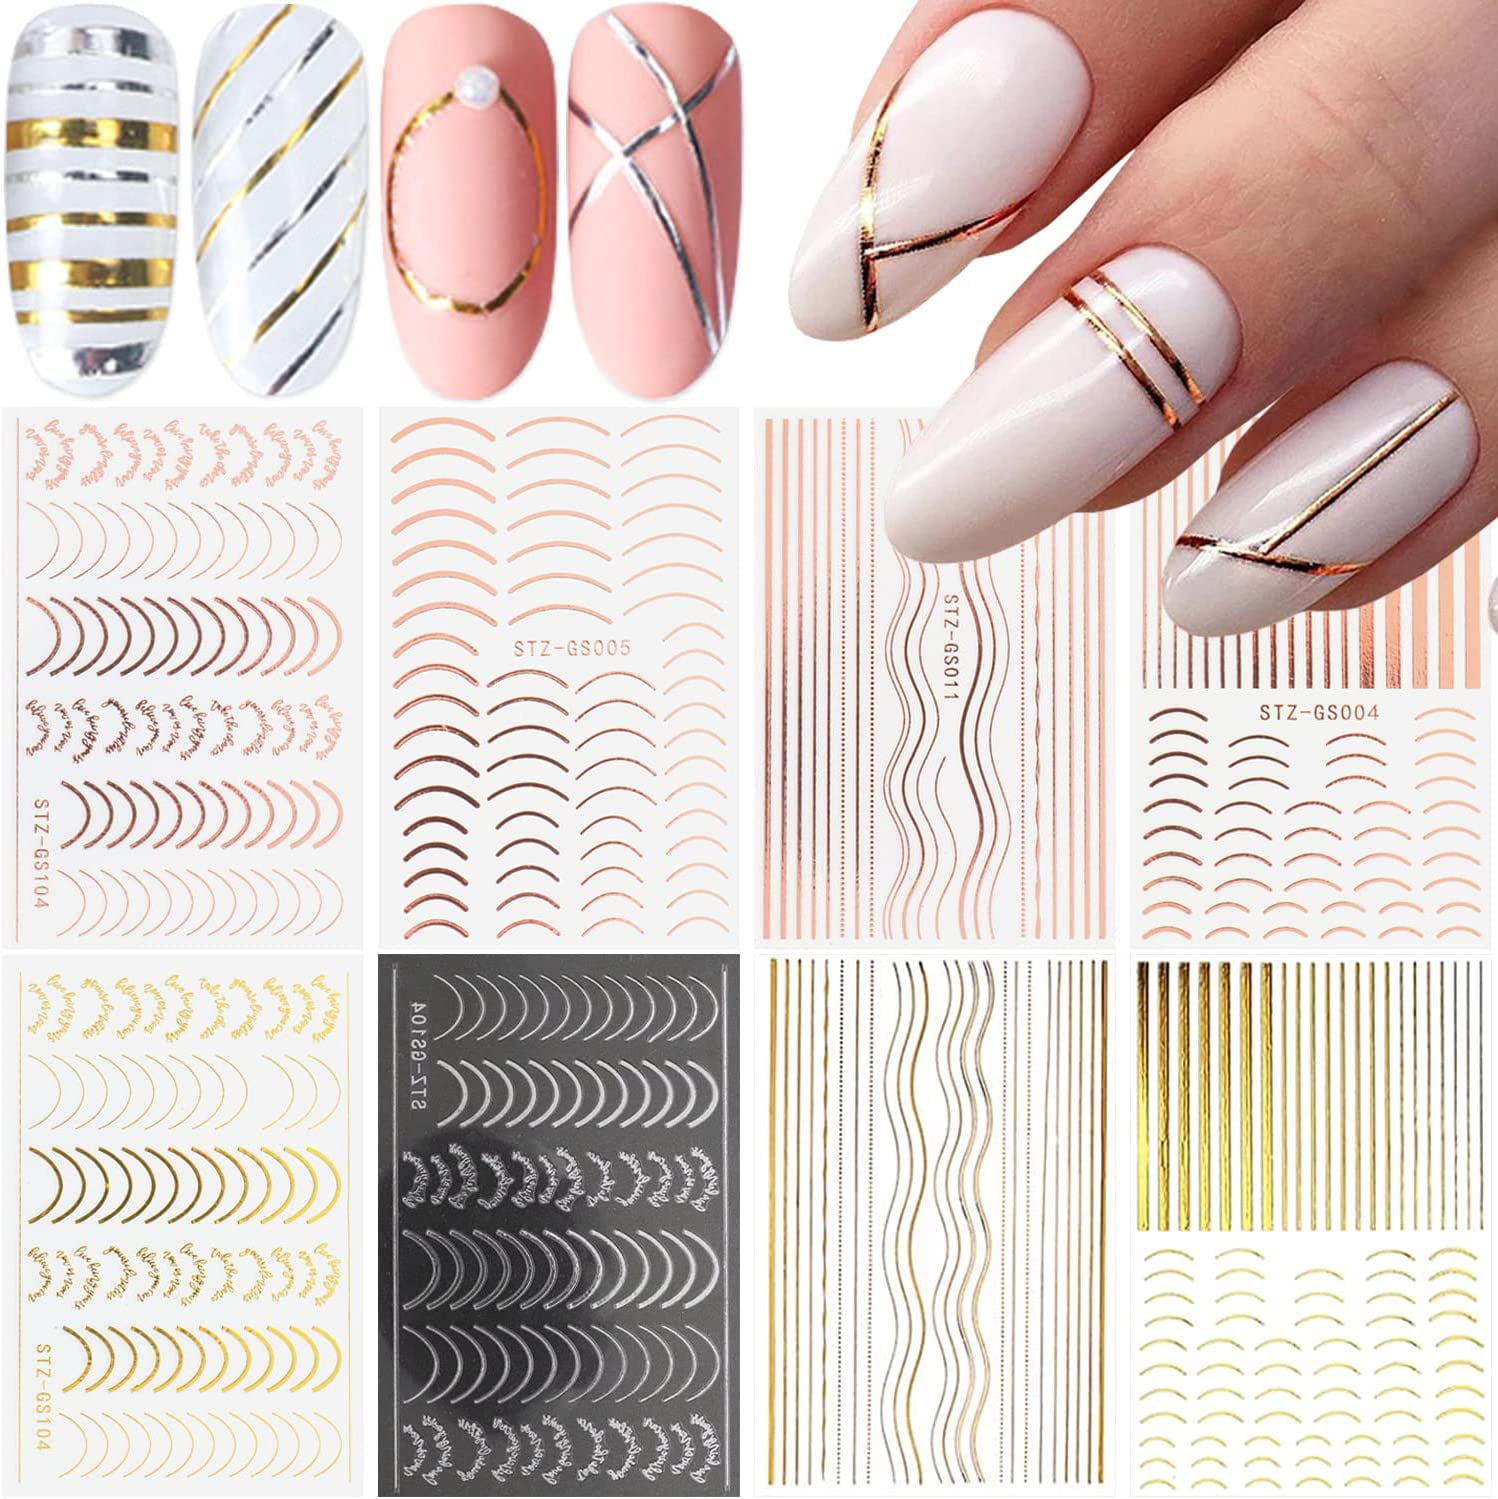 Flexi Striping Tape | Nail Stamping Queen